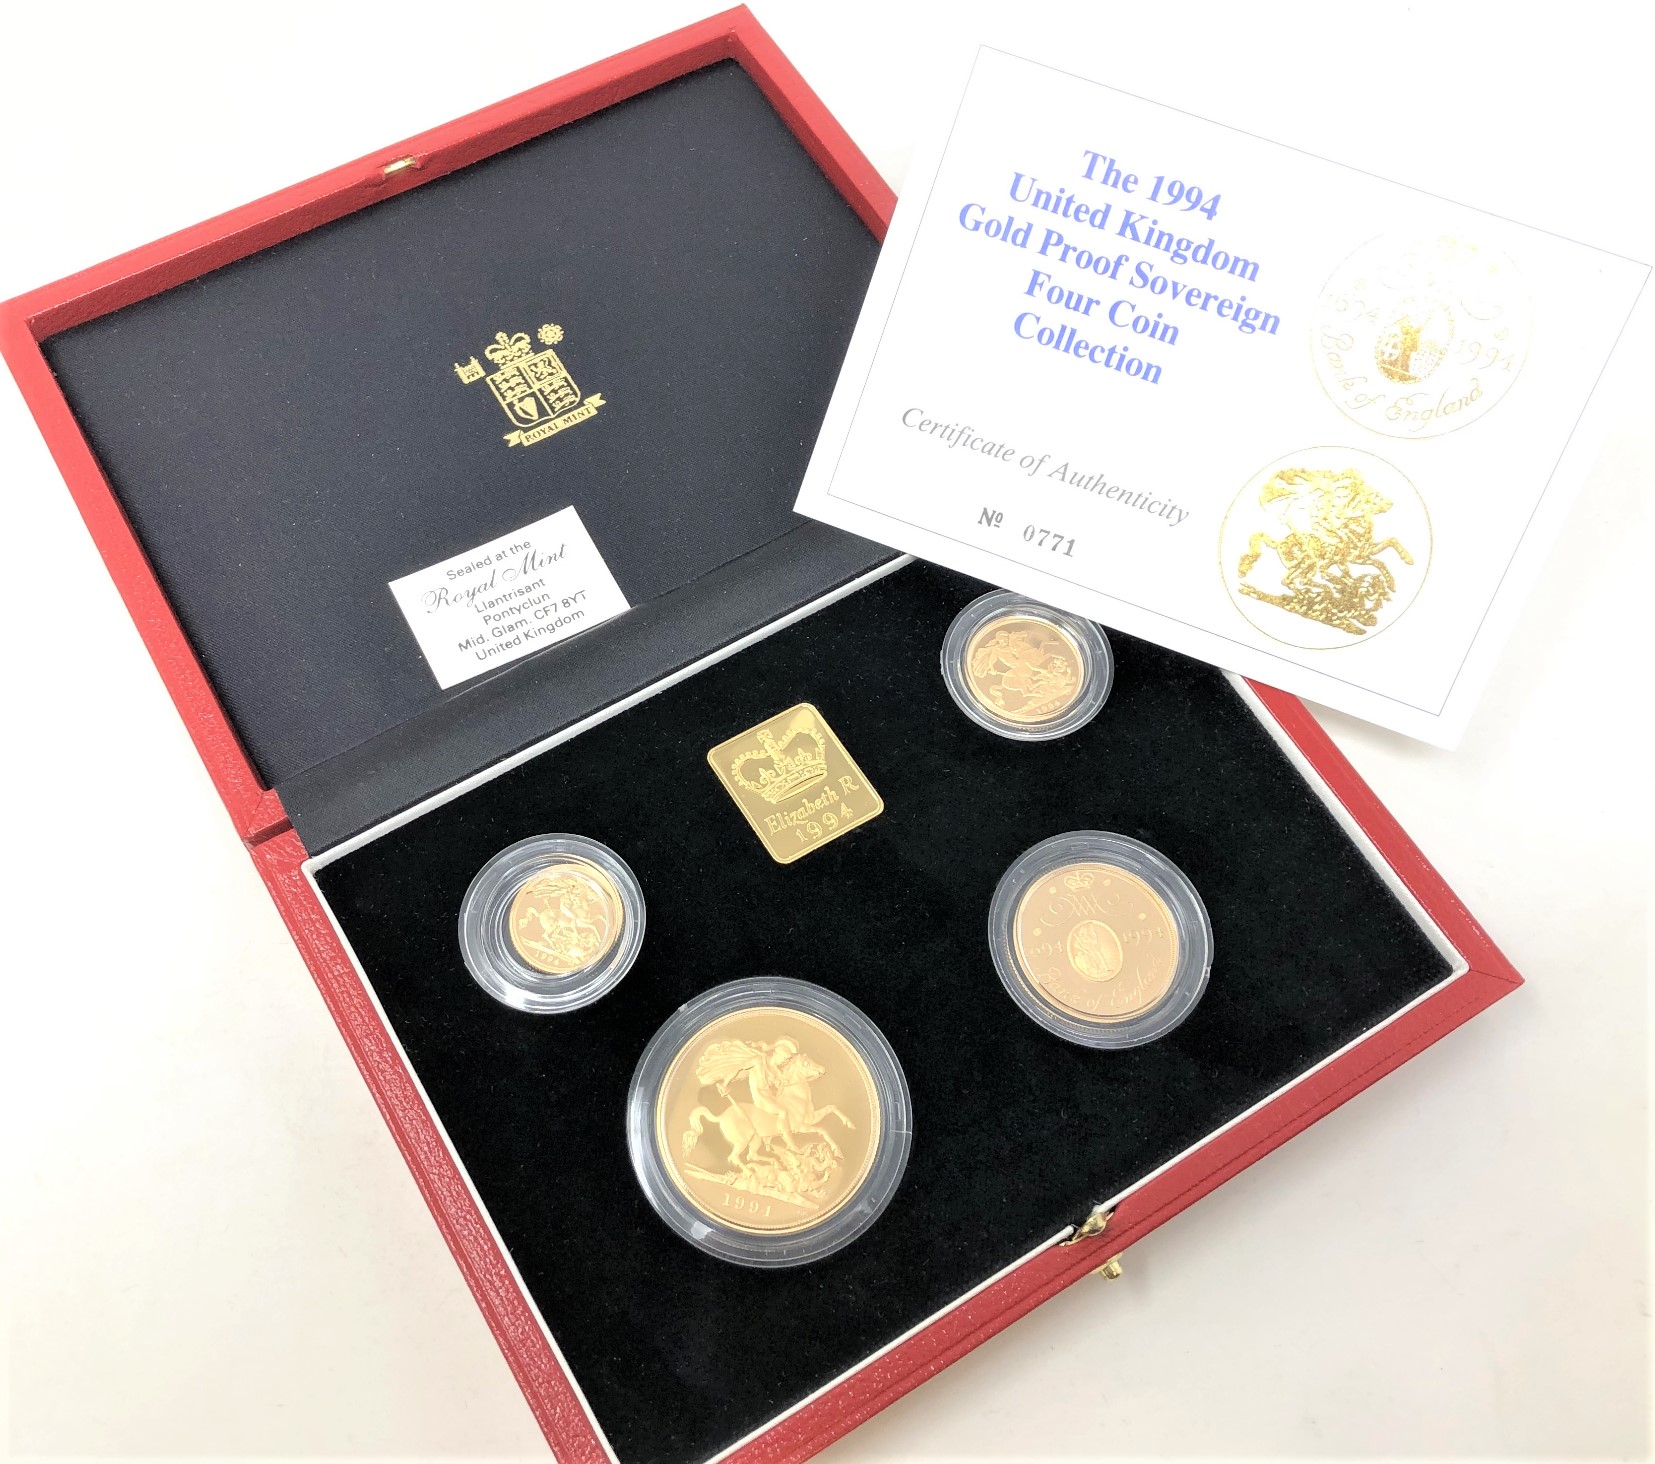 Royal Mint - The 1994 United Kingdom Gold Proof Sovereign Four coin collection, certificate no.